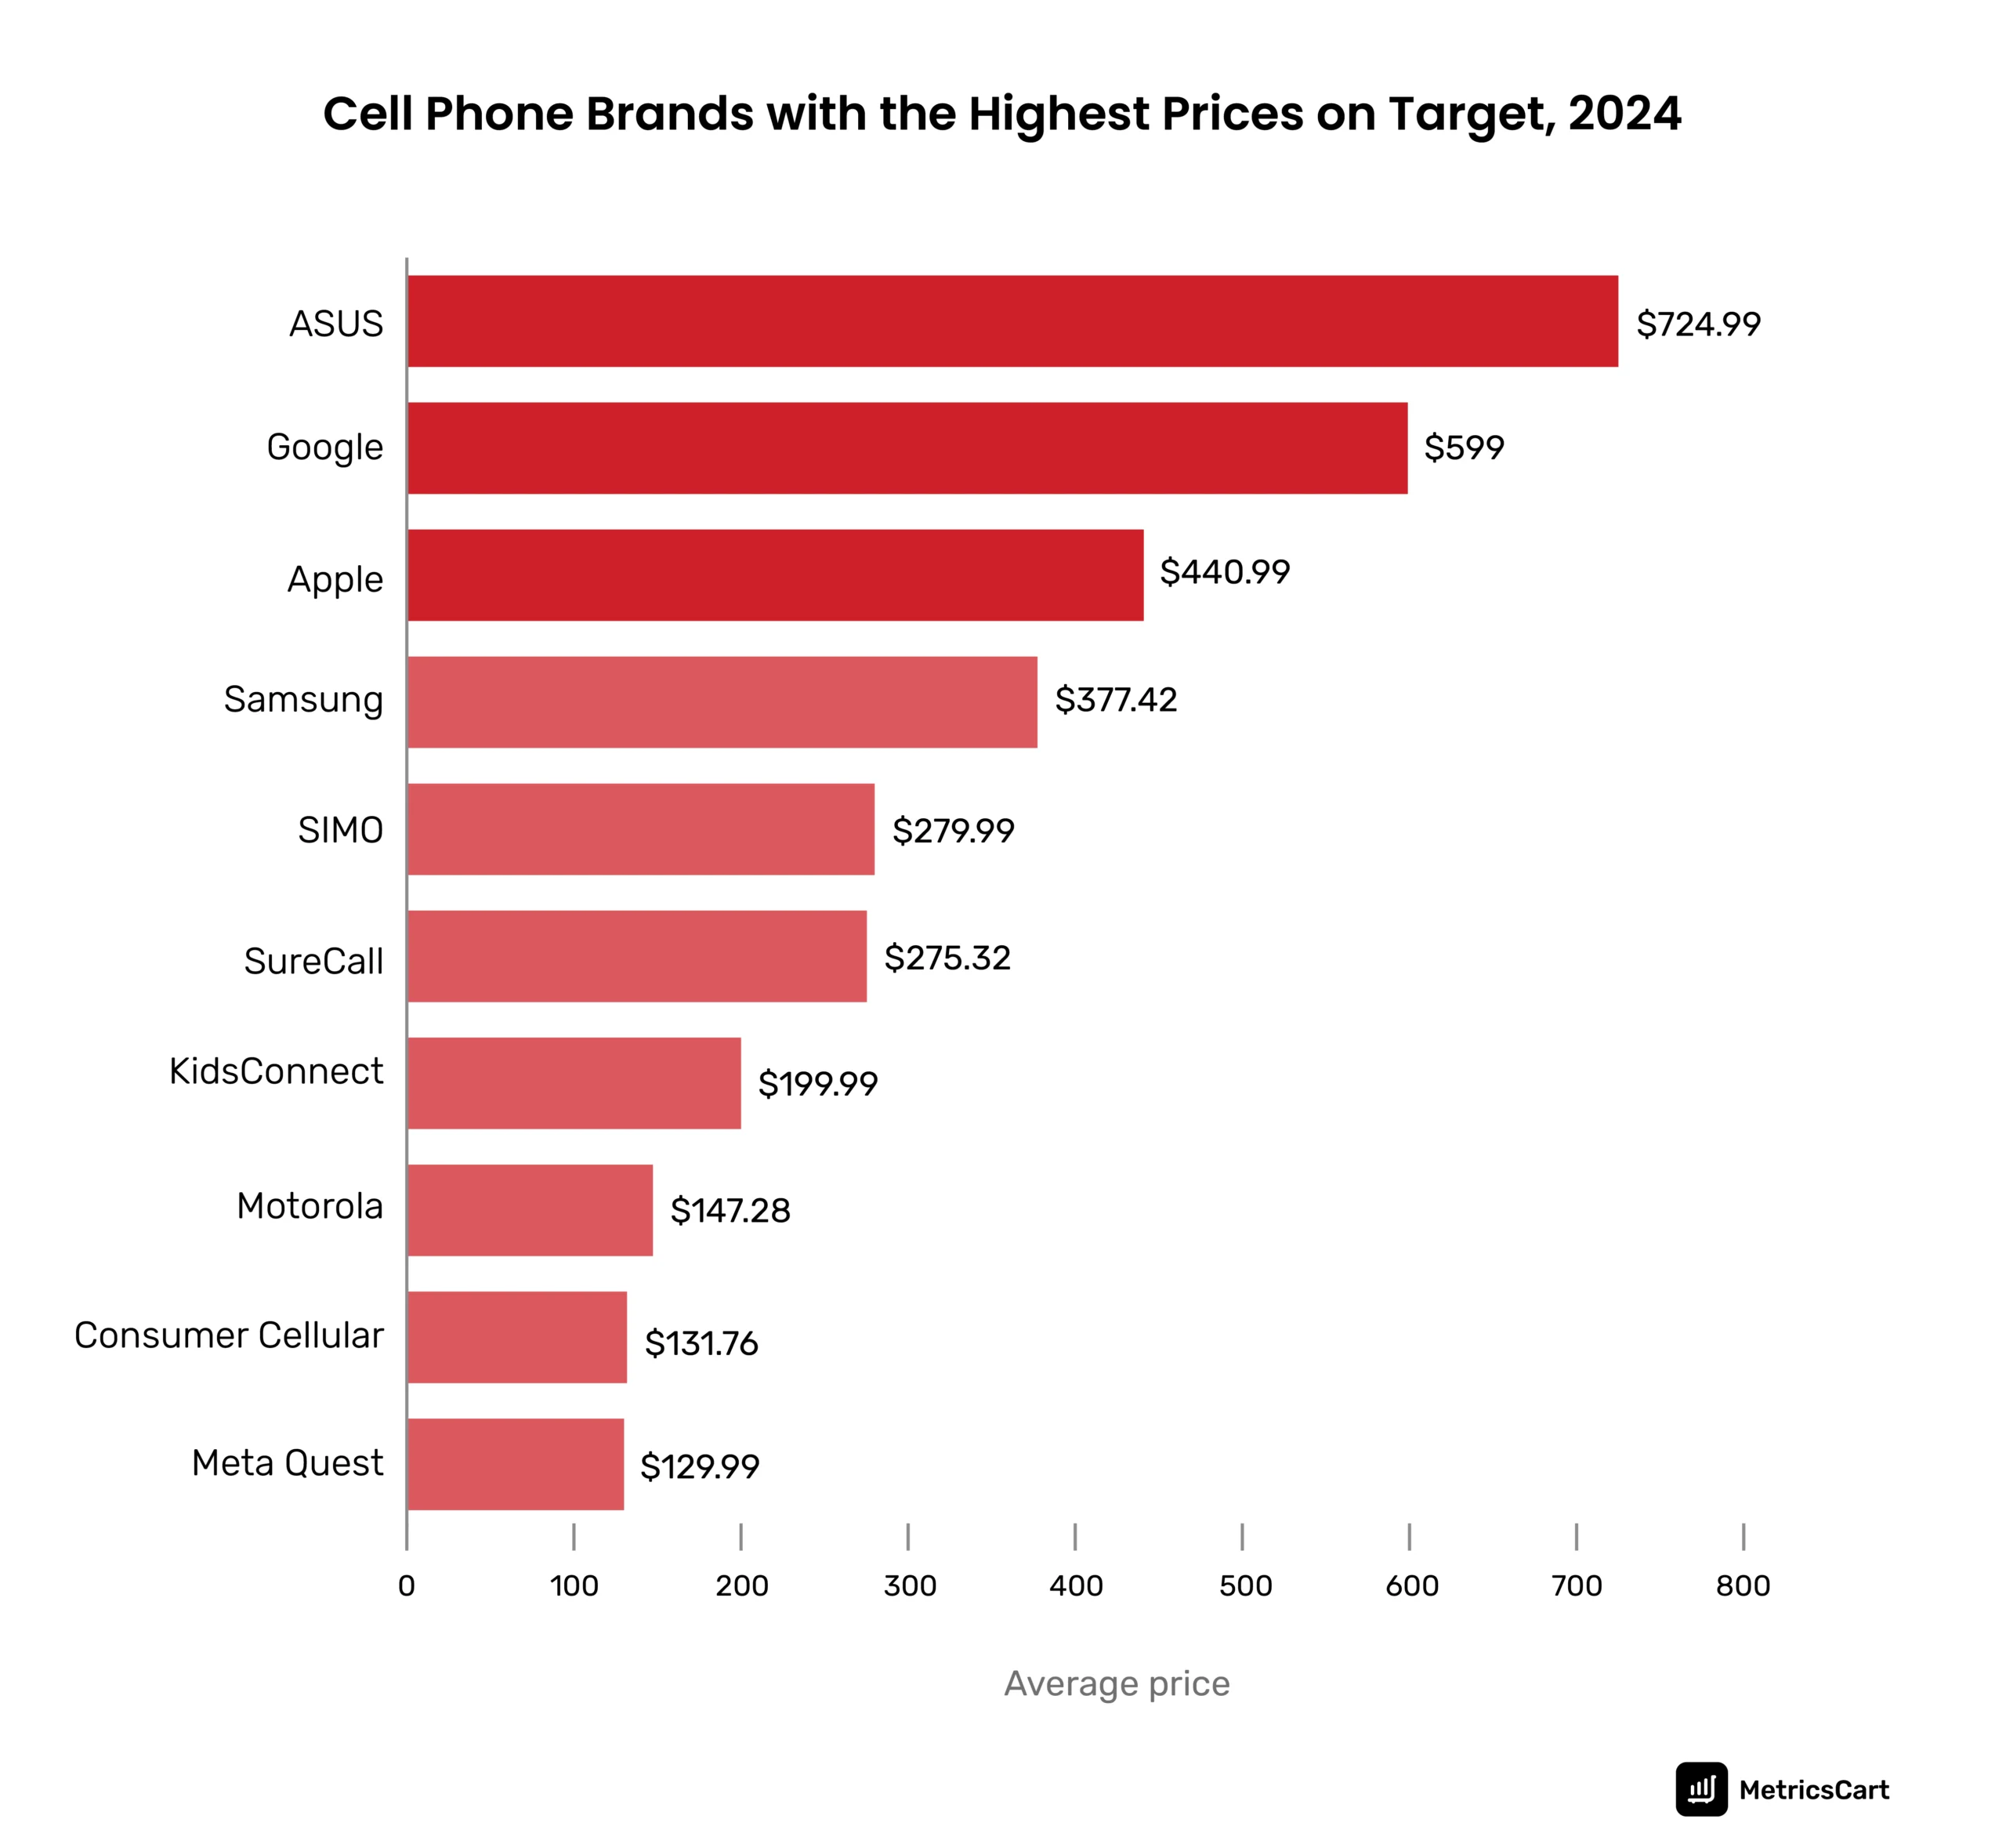 The graph shows the 10 most expensive cell phone brands selling on Target in 2024